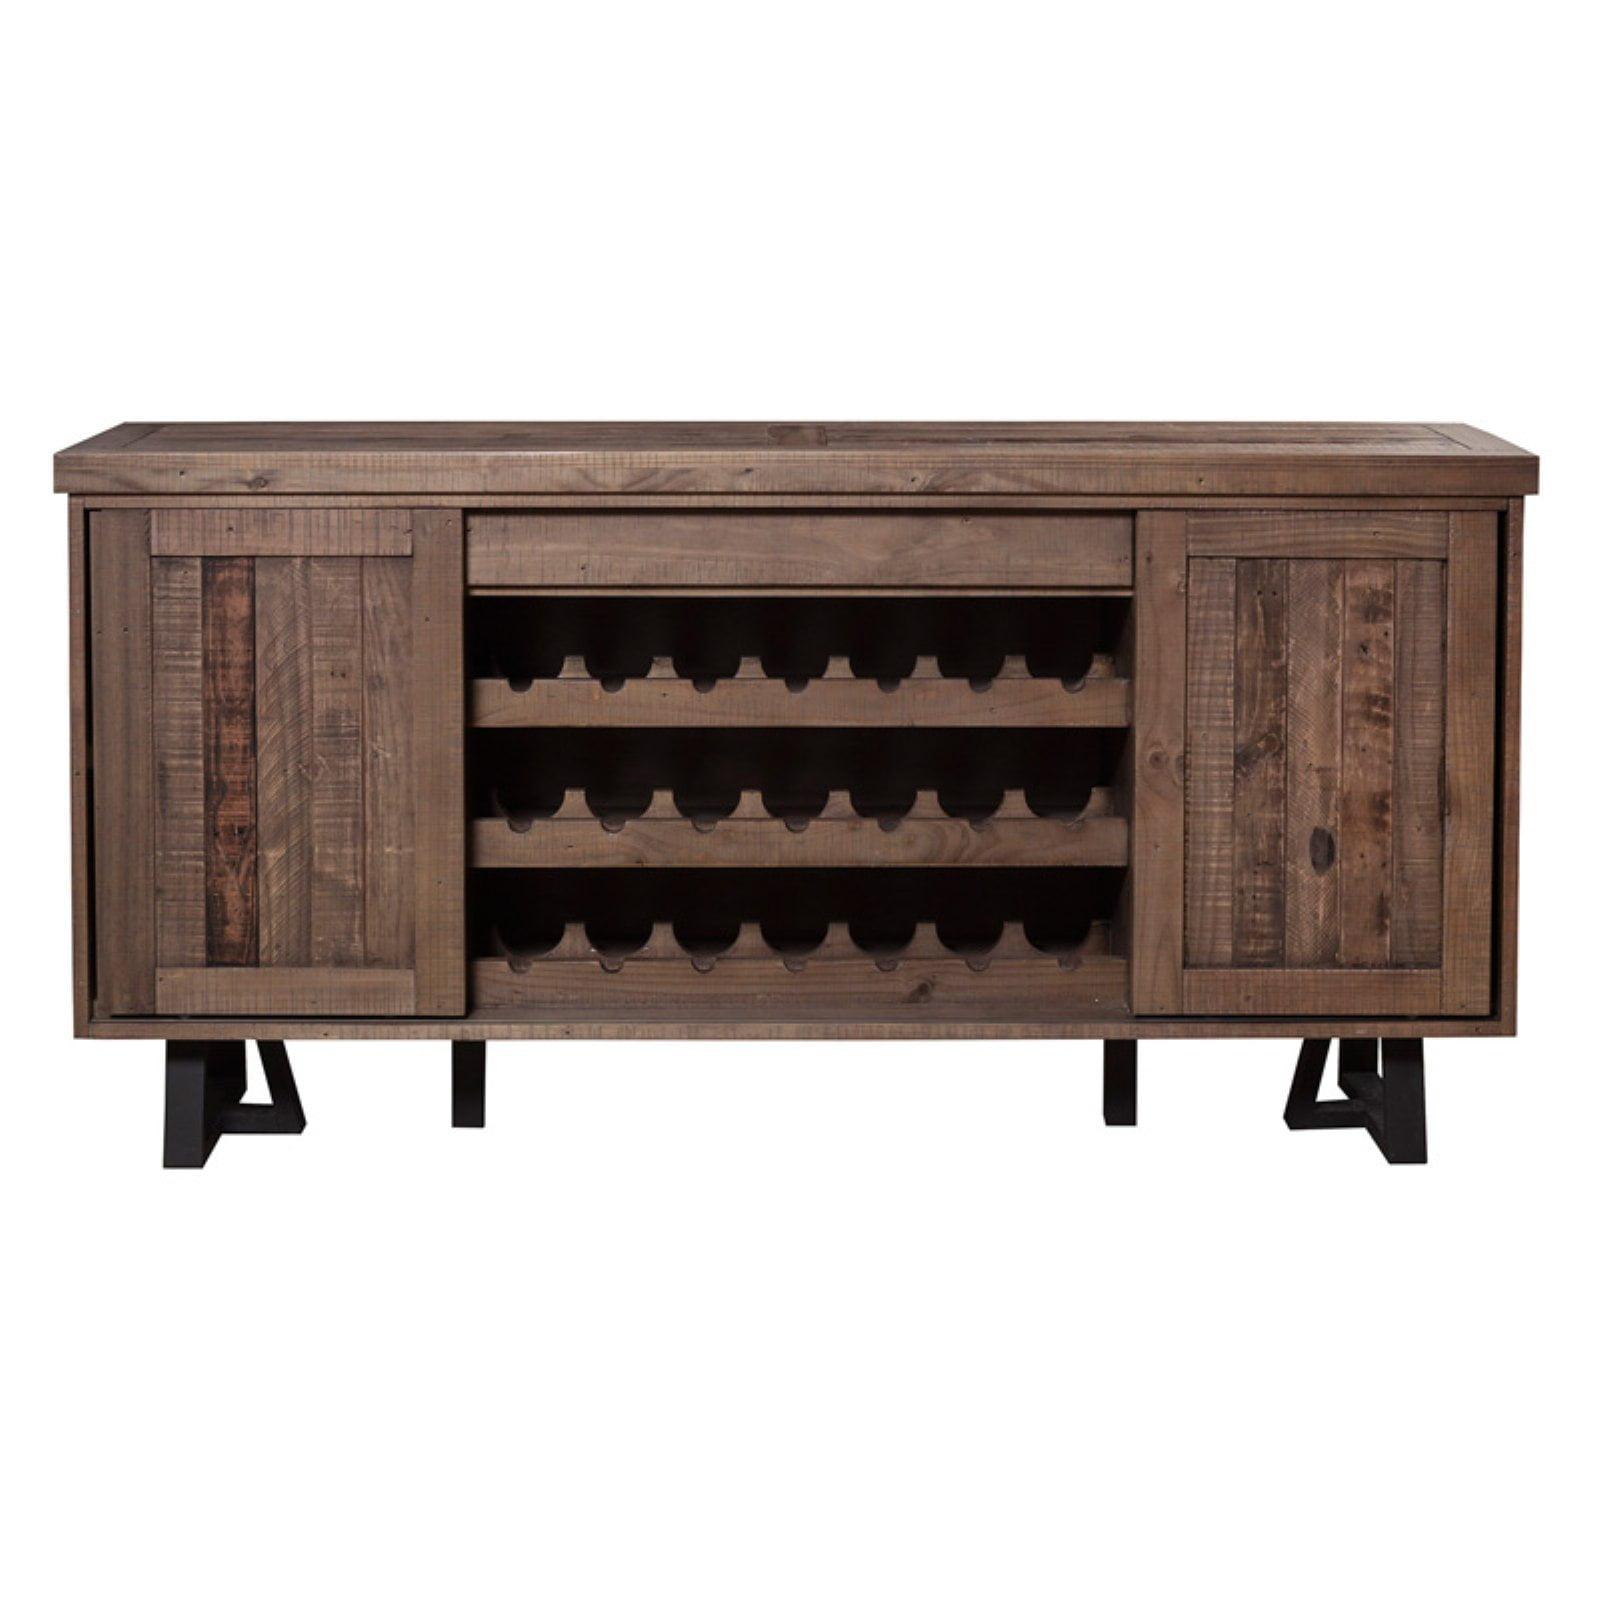 Rustic Transitional Acacia Wood Sideboard with Wine Storage, Natural-Black